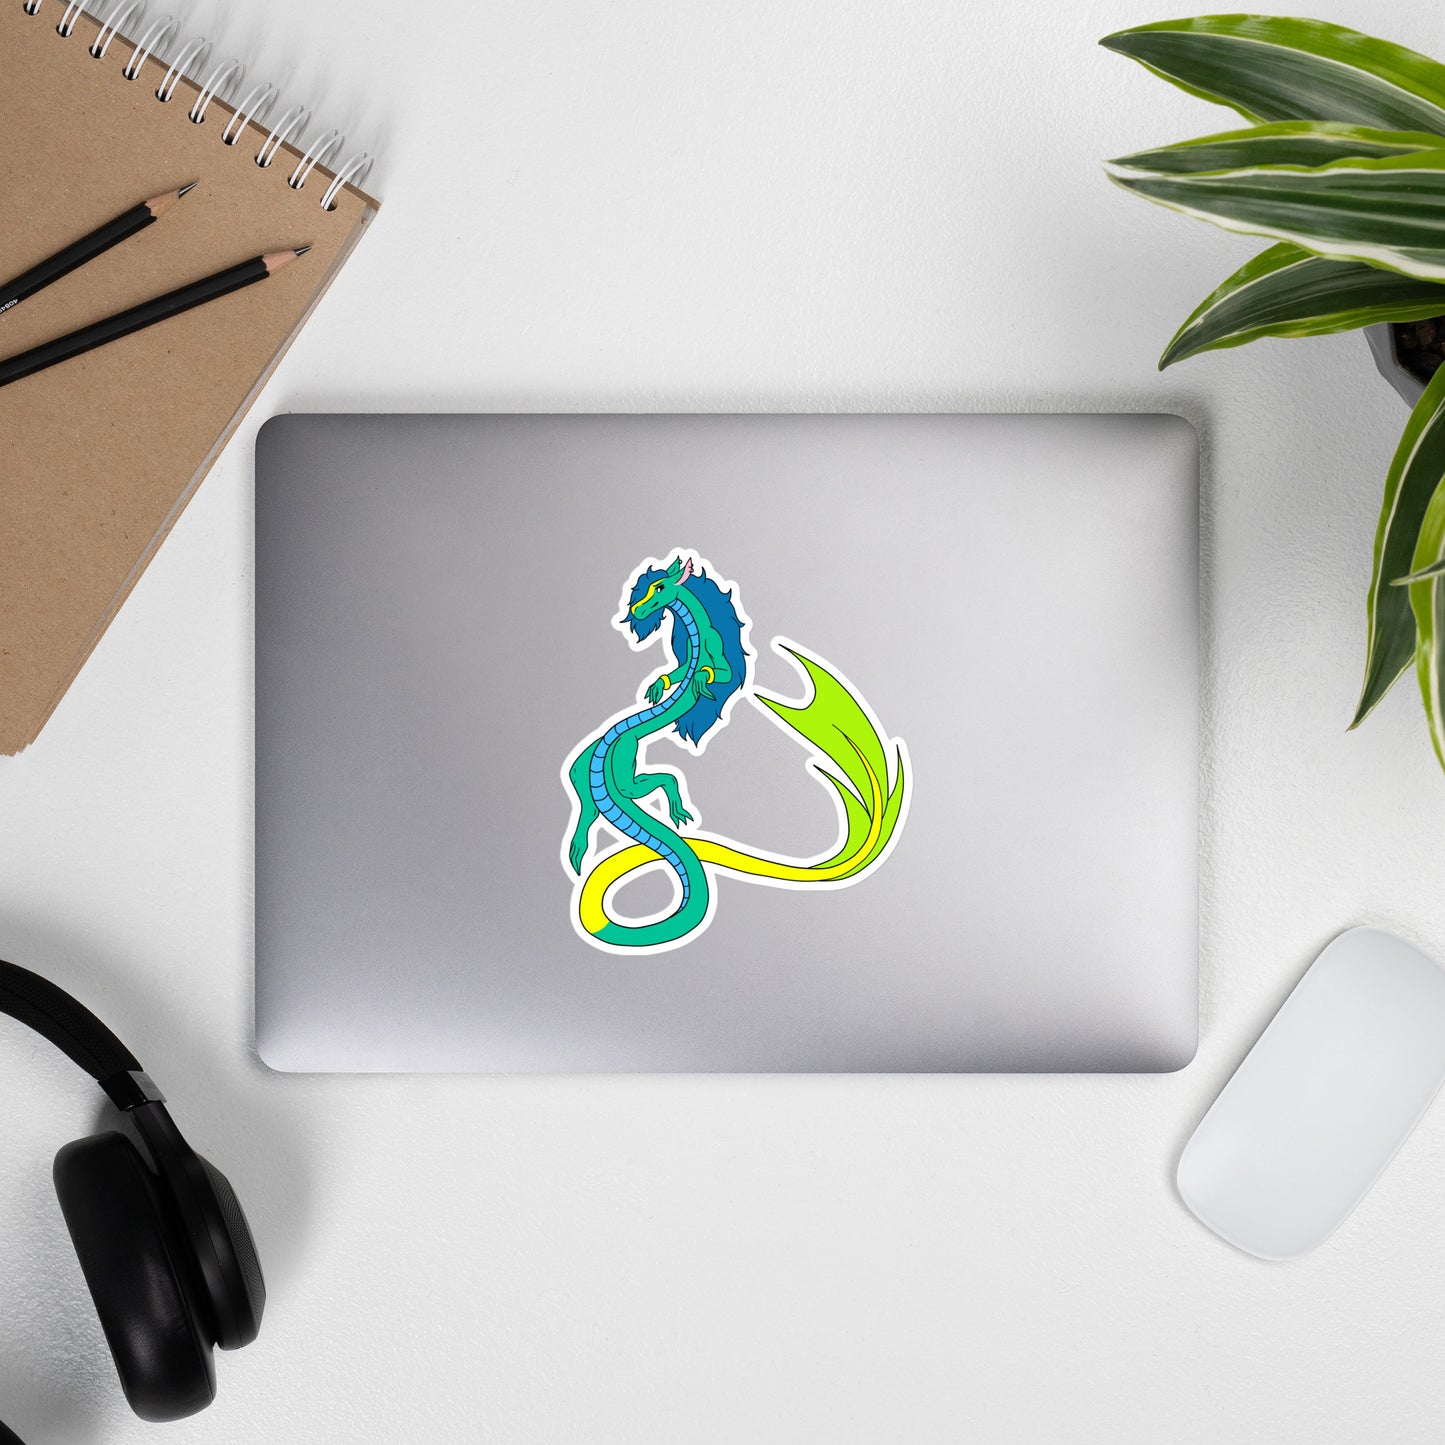 Mikori the Fuzzy Noodle Dragon. Original character design kiss-cut vinyl sticker with white border. 5.5 inches tall. Shown on a laptop.